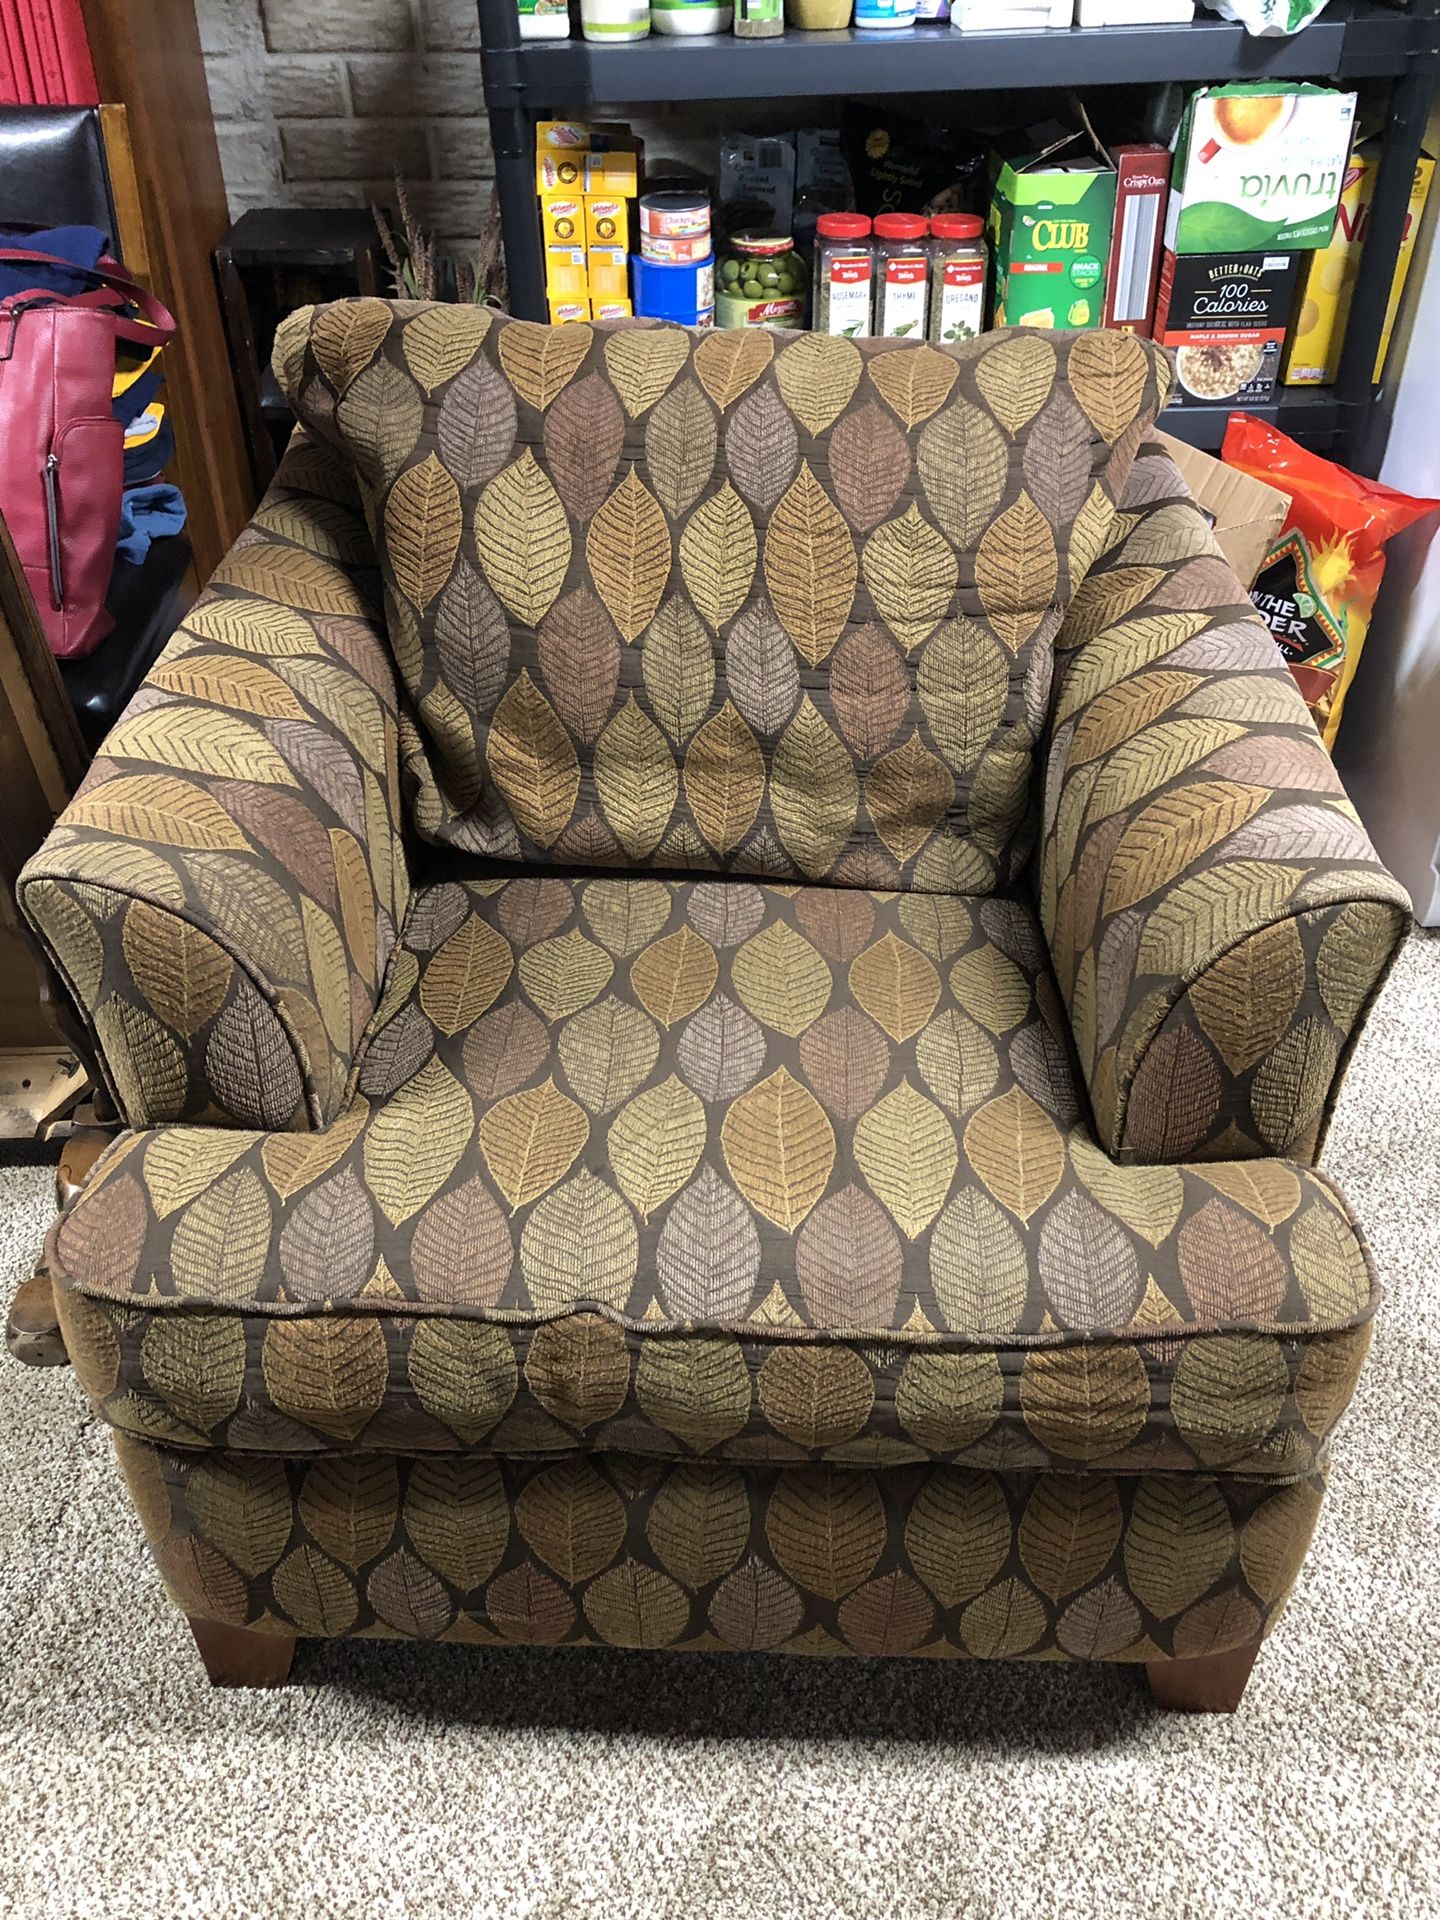 Nice custom fabric chair from Lazy Boy. Nearly new condition.